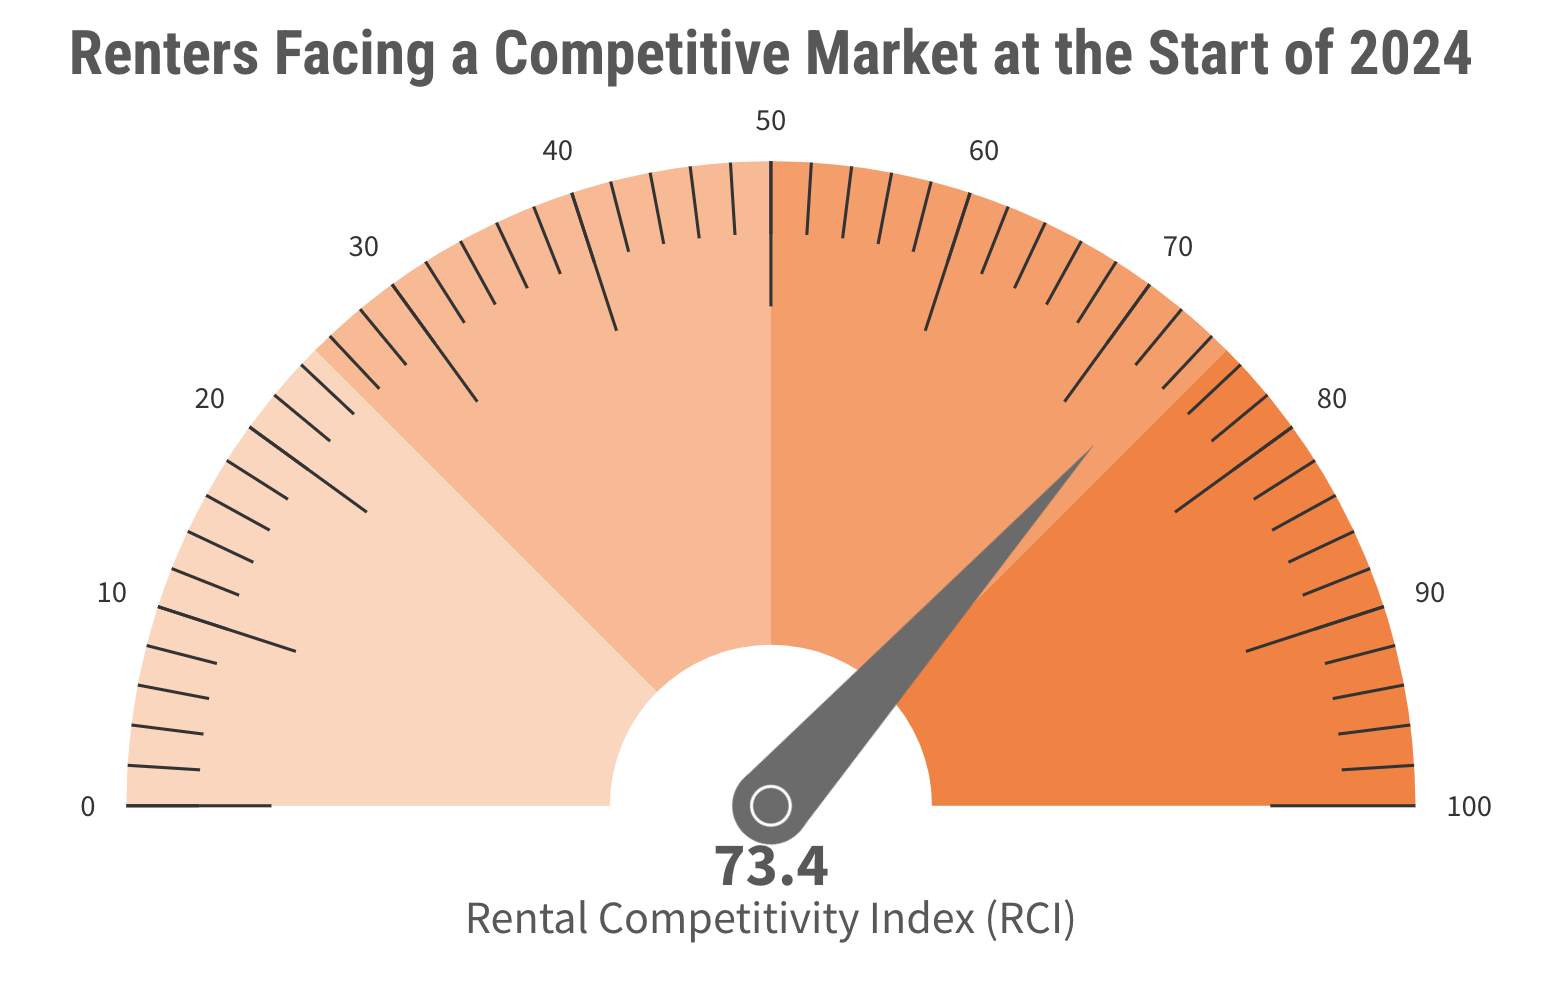 Renters Facing a Competitive Market at the Start of 2024